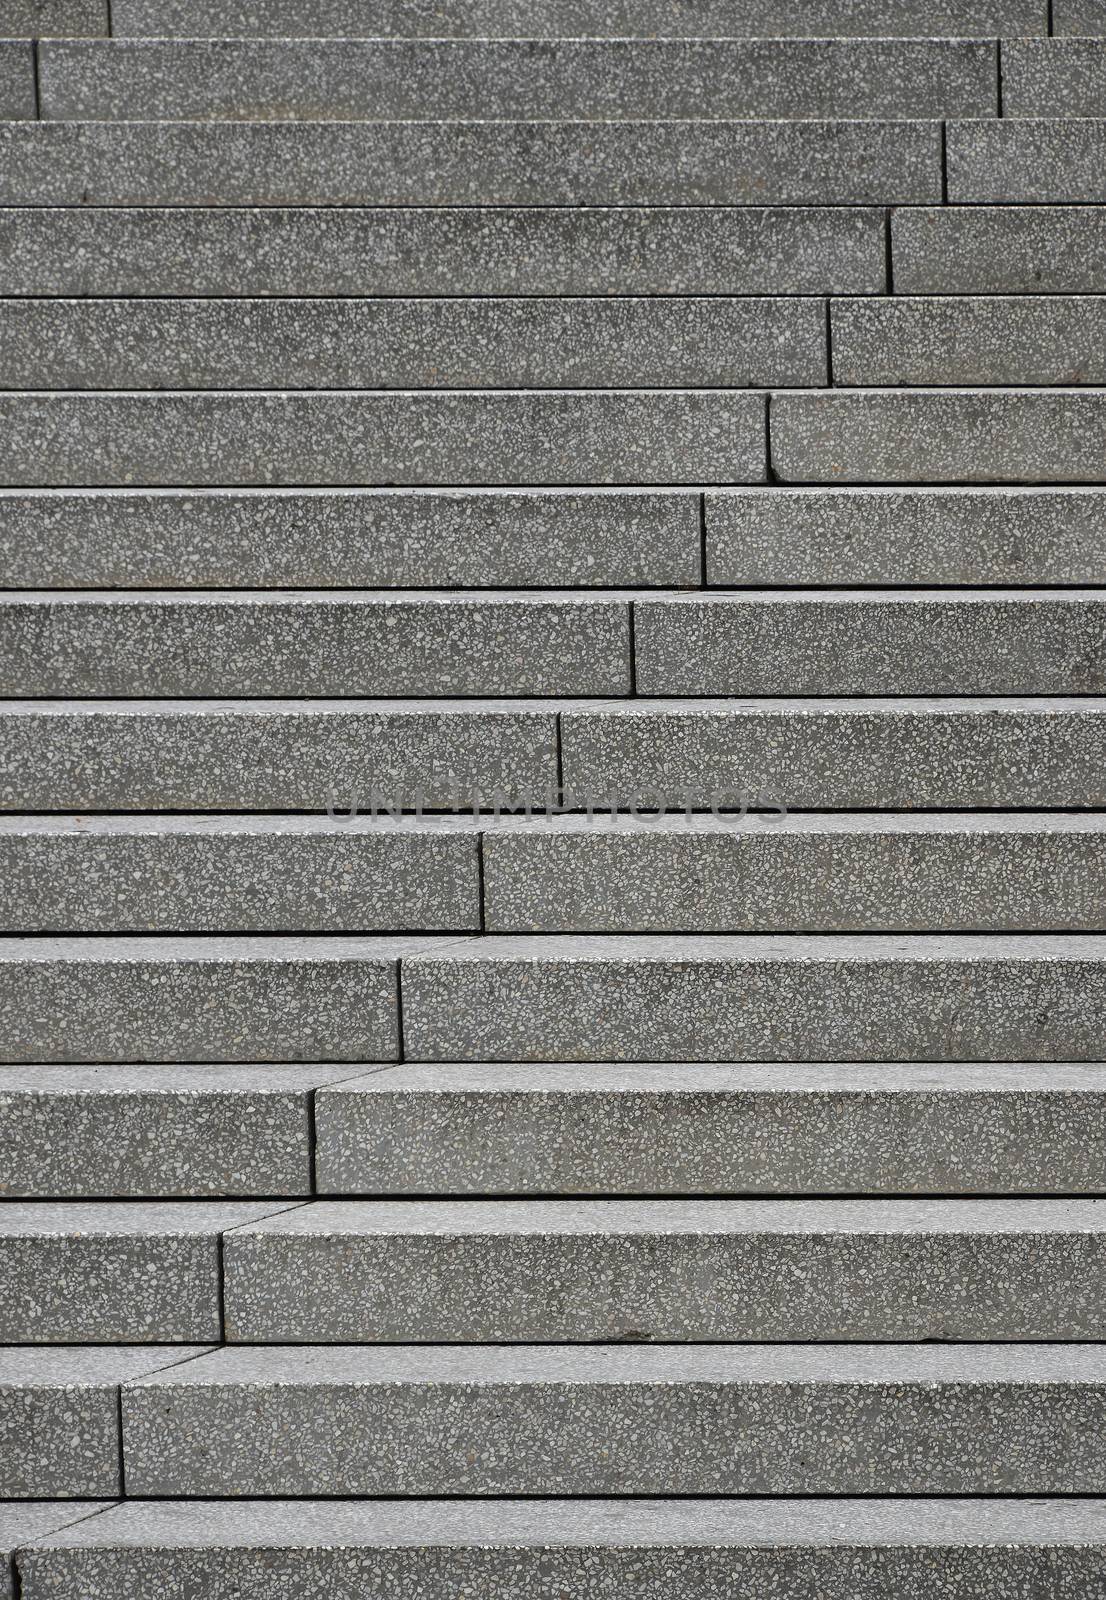 Close up grey concrete stairs perspective ascending, low angle view